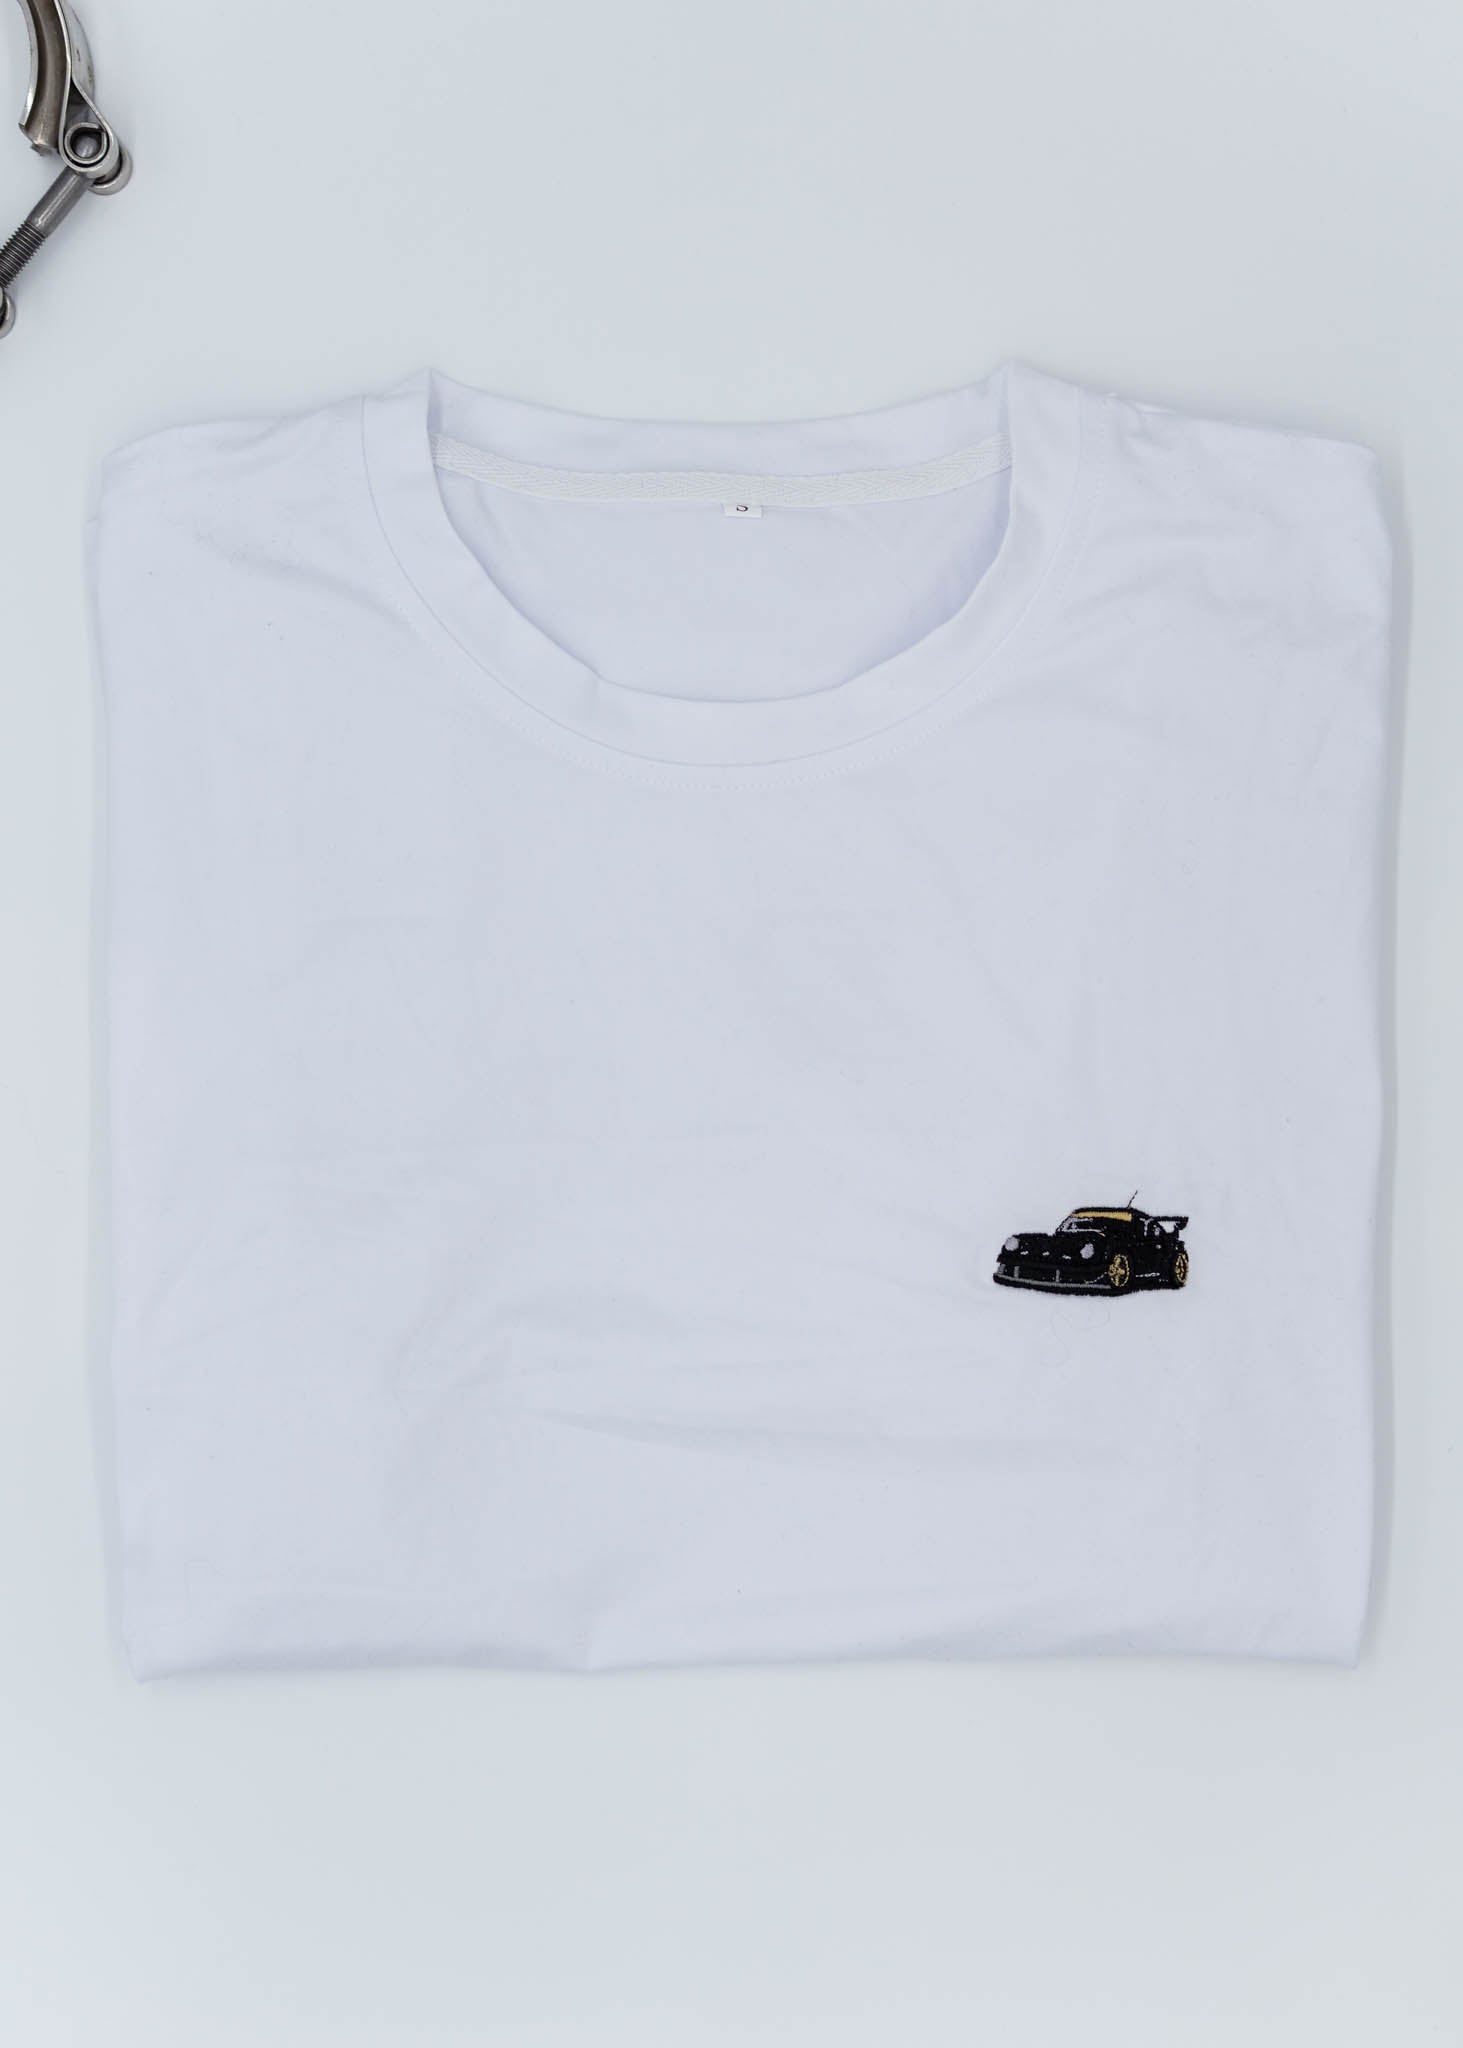 A white Porsche T-Shirt for men. Photo is a front view of the shirt with an embroidered RWB Porsche 930 911 Turbo Stella Artois. Fabric composition is 100% polyester. The material is very stretchy, soft, comfortable, breathable, and non-transparent. The style of this shirt is short sleeve, with a crewneck neckline.